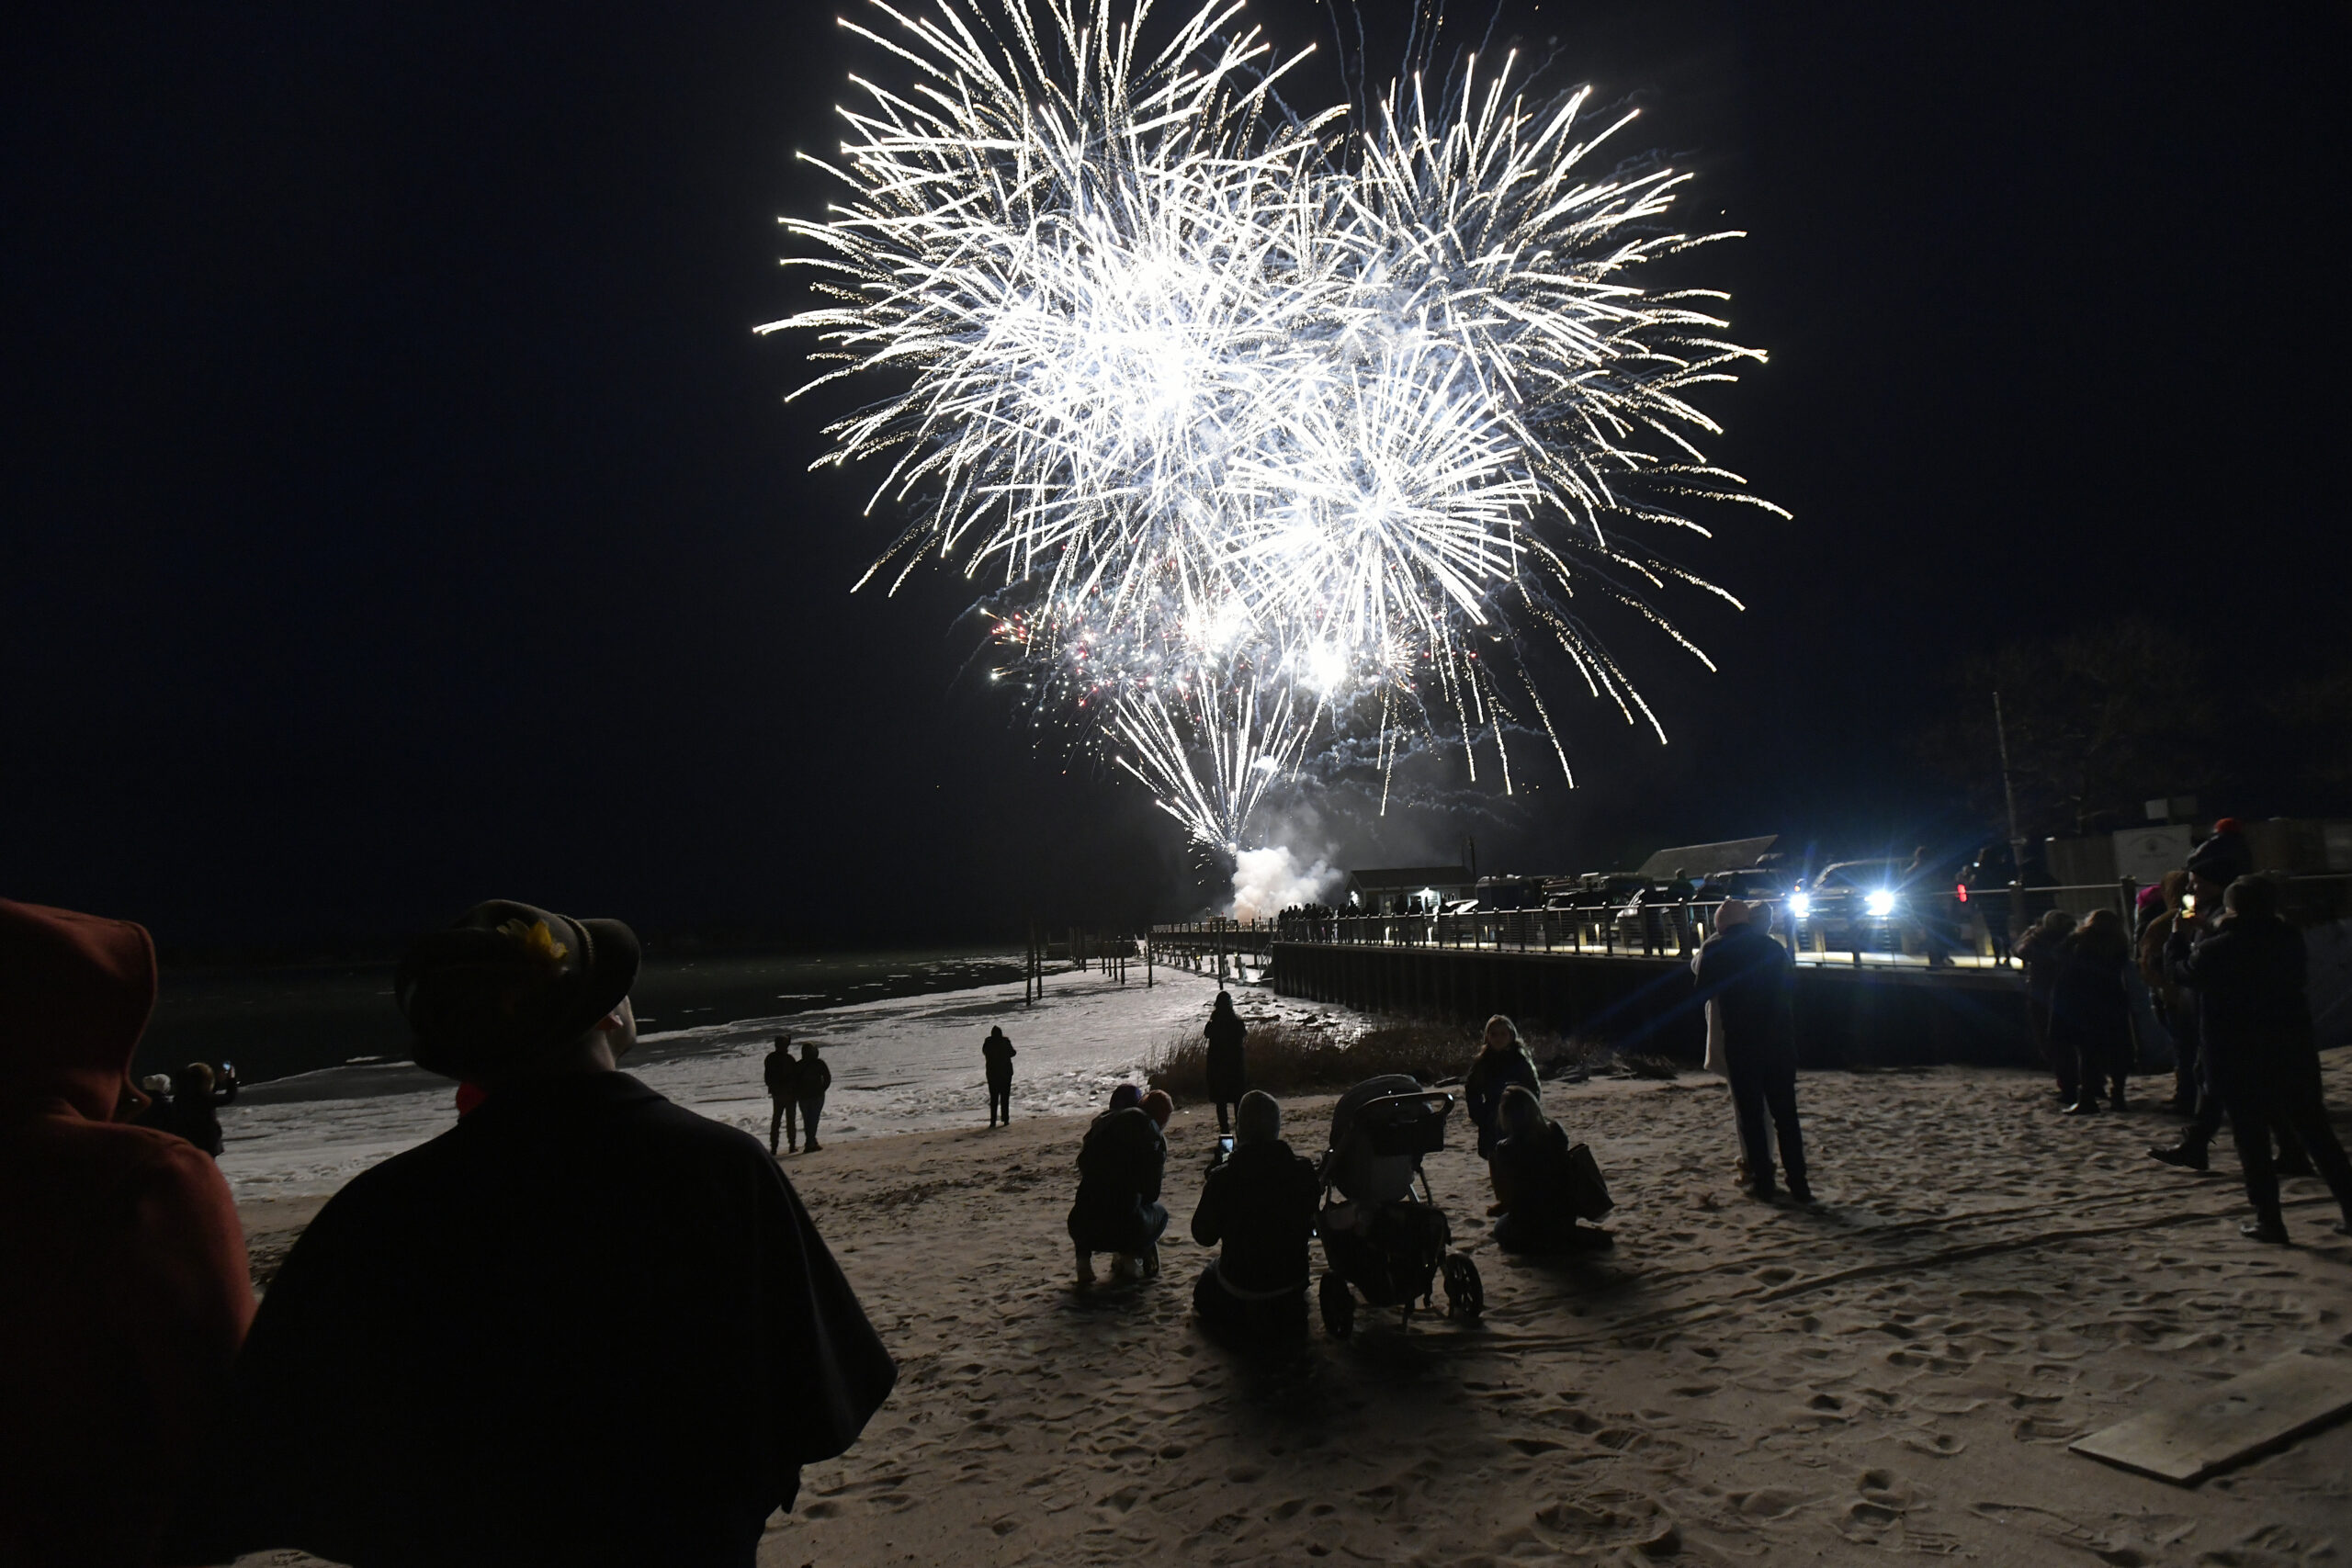 Folks braved the cold to watch fireworks by Grucci off Long Wharf.   DANA SHAW